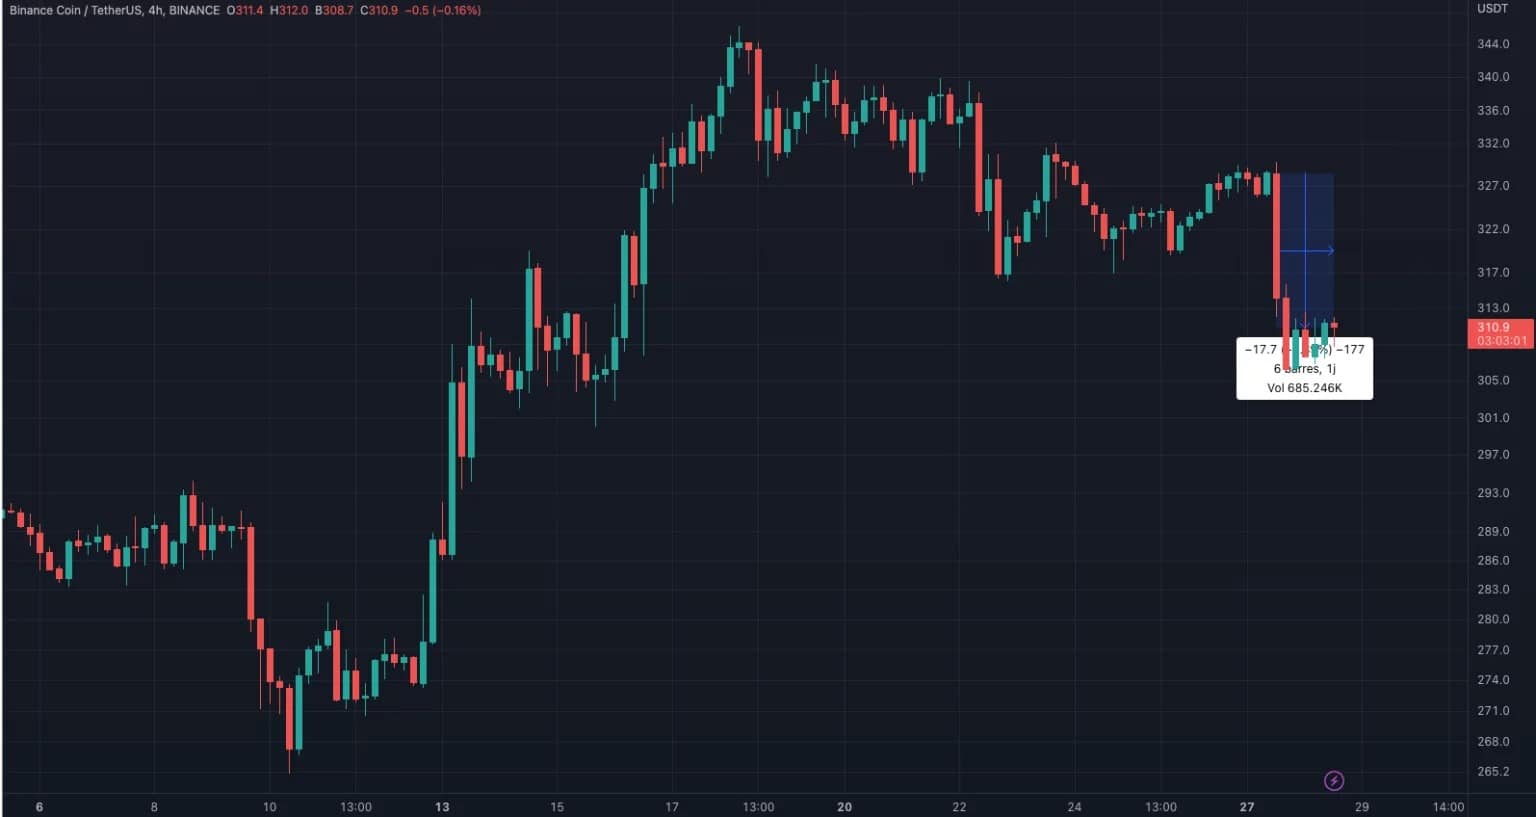 The fall of BNB/USDT over last 24 hours